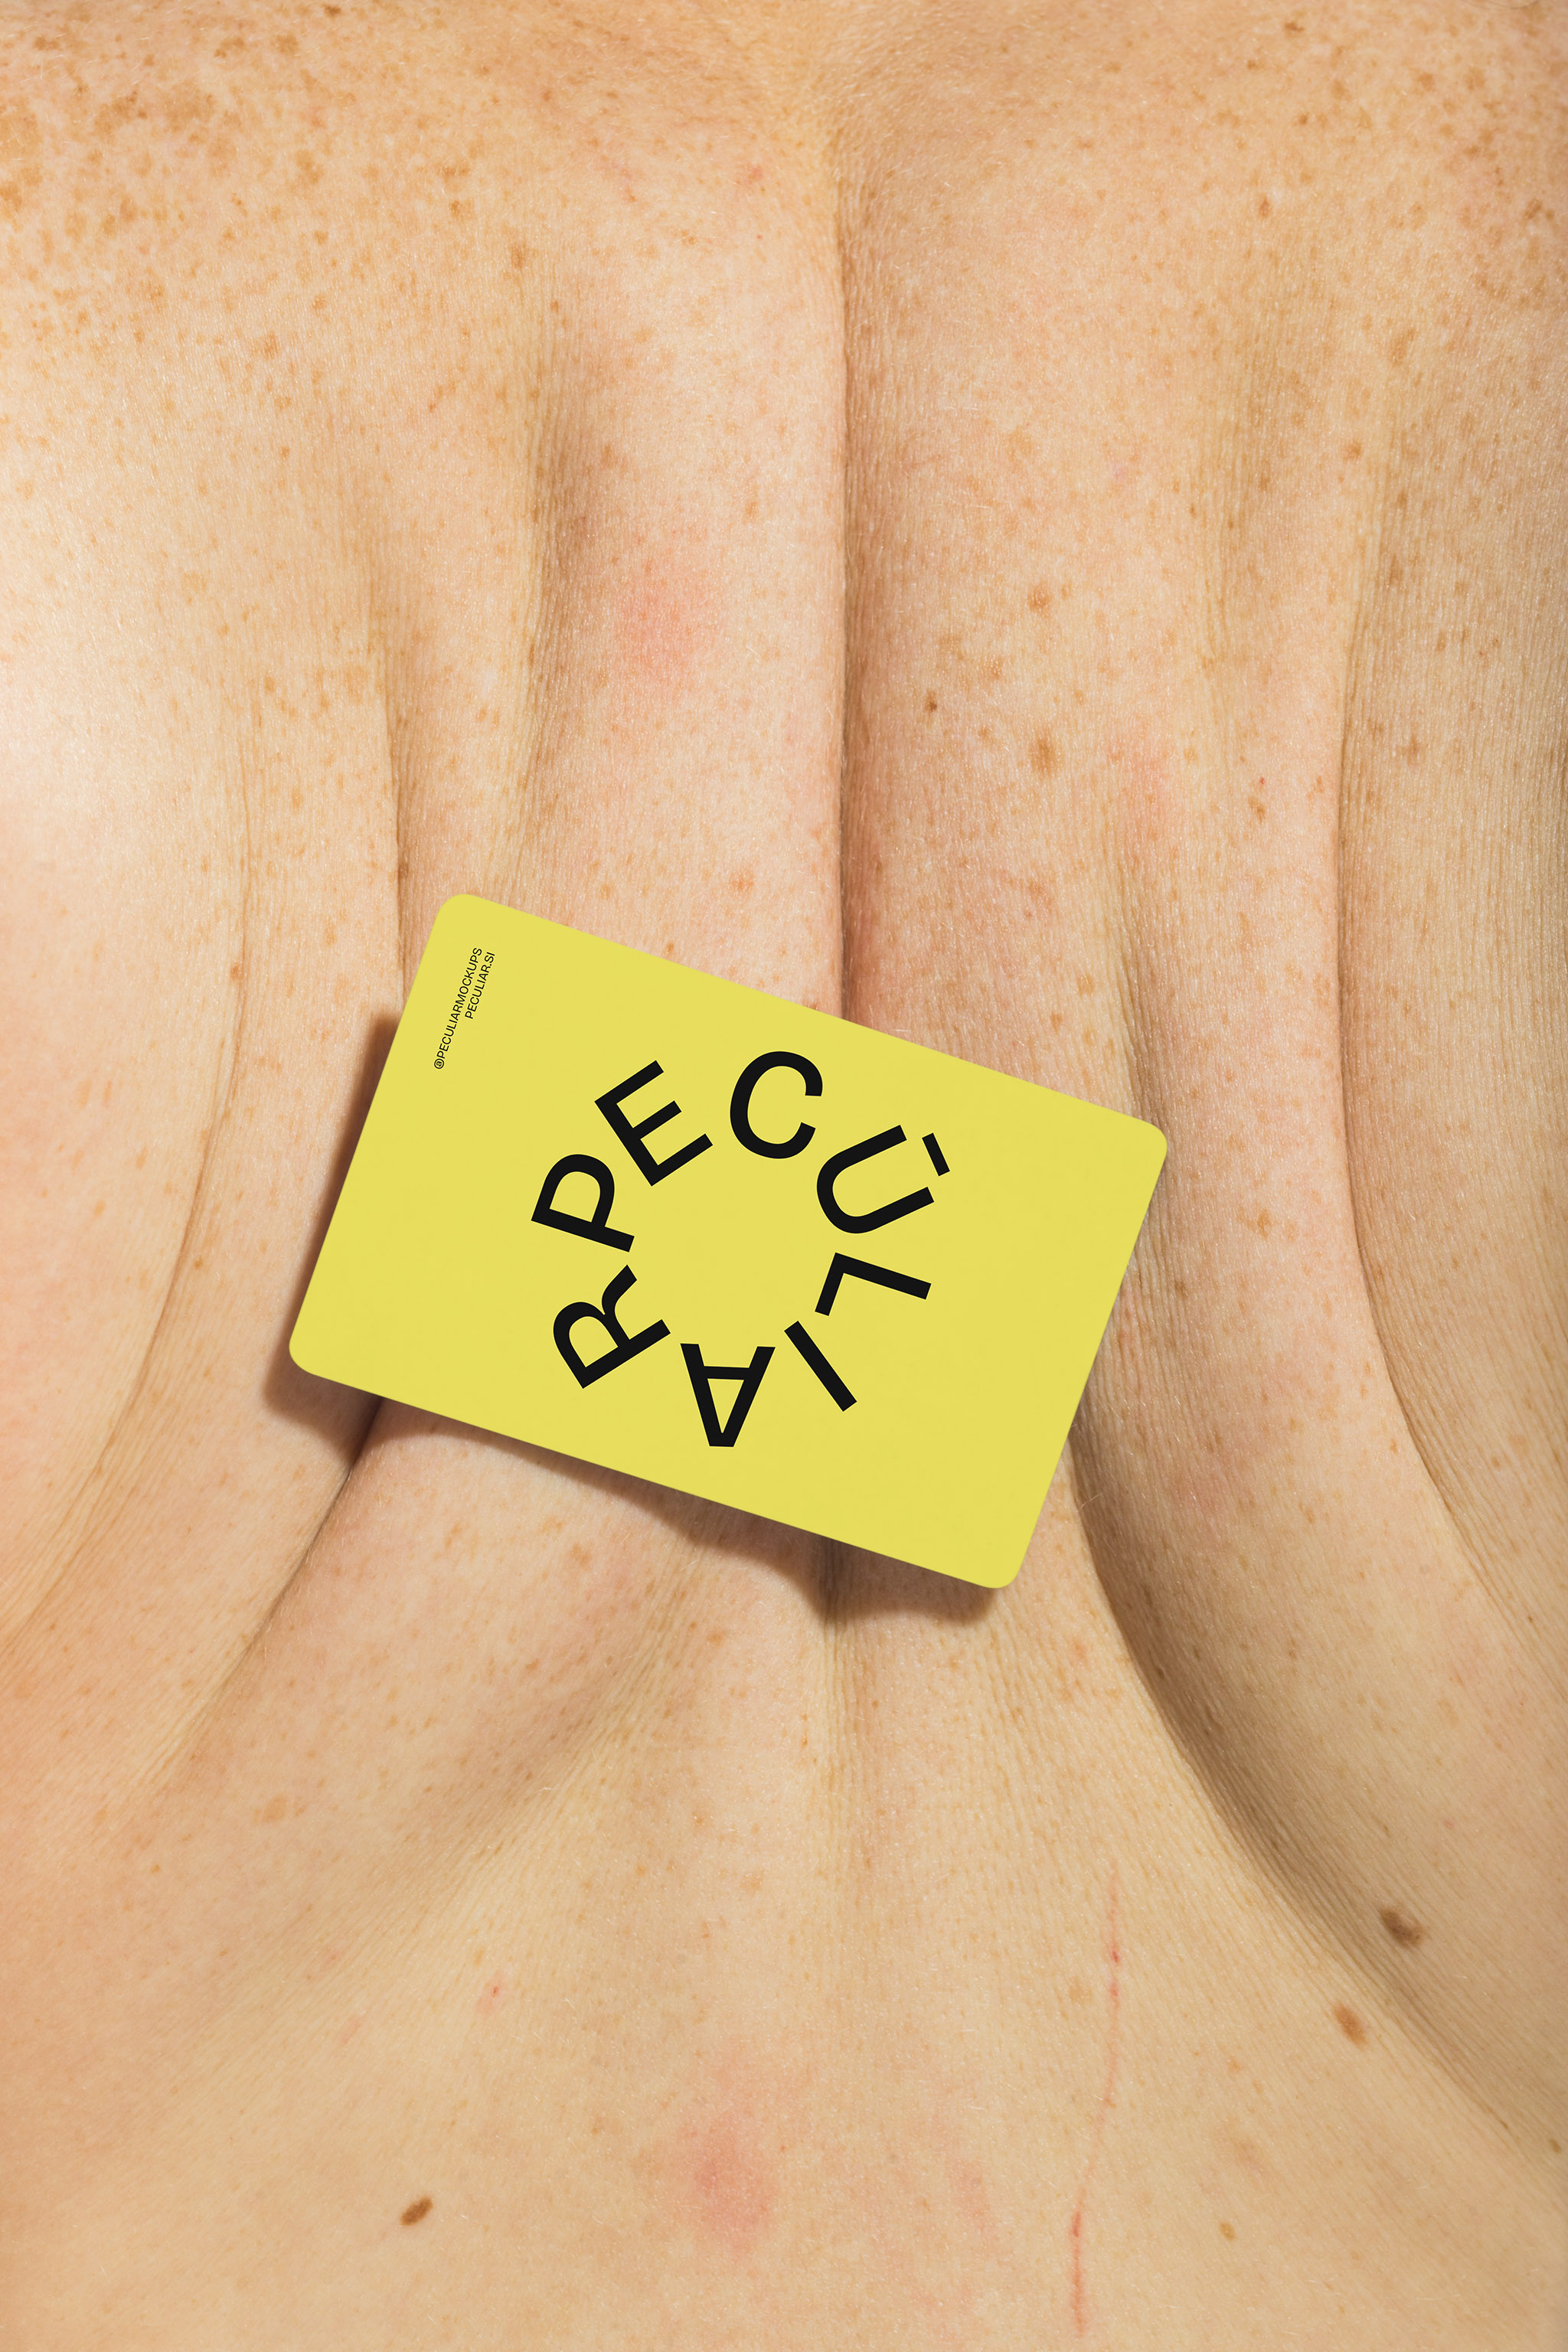 Business card mockup placed on a person's bare muscular back, suggesting weightlifting and fitness, in use example.